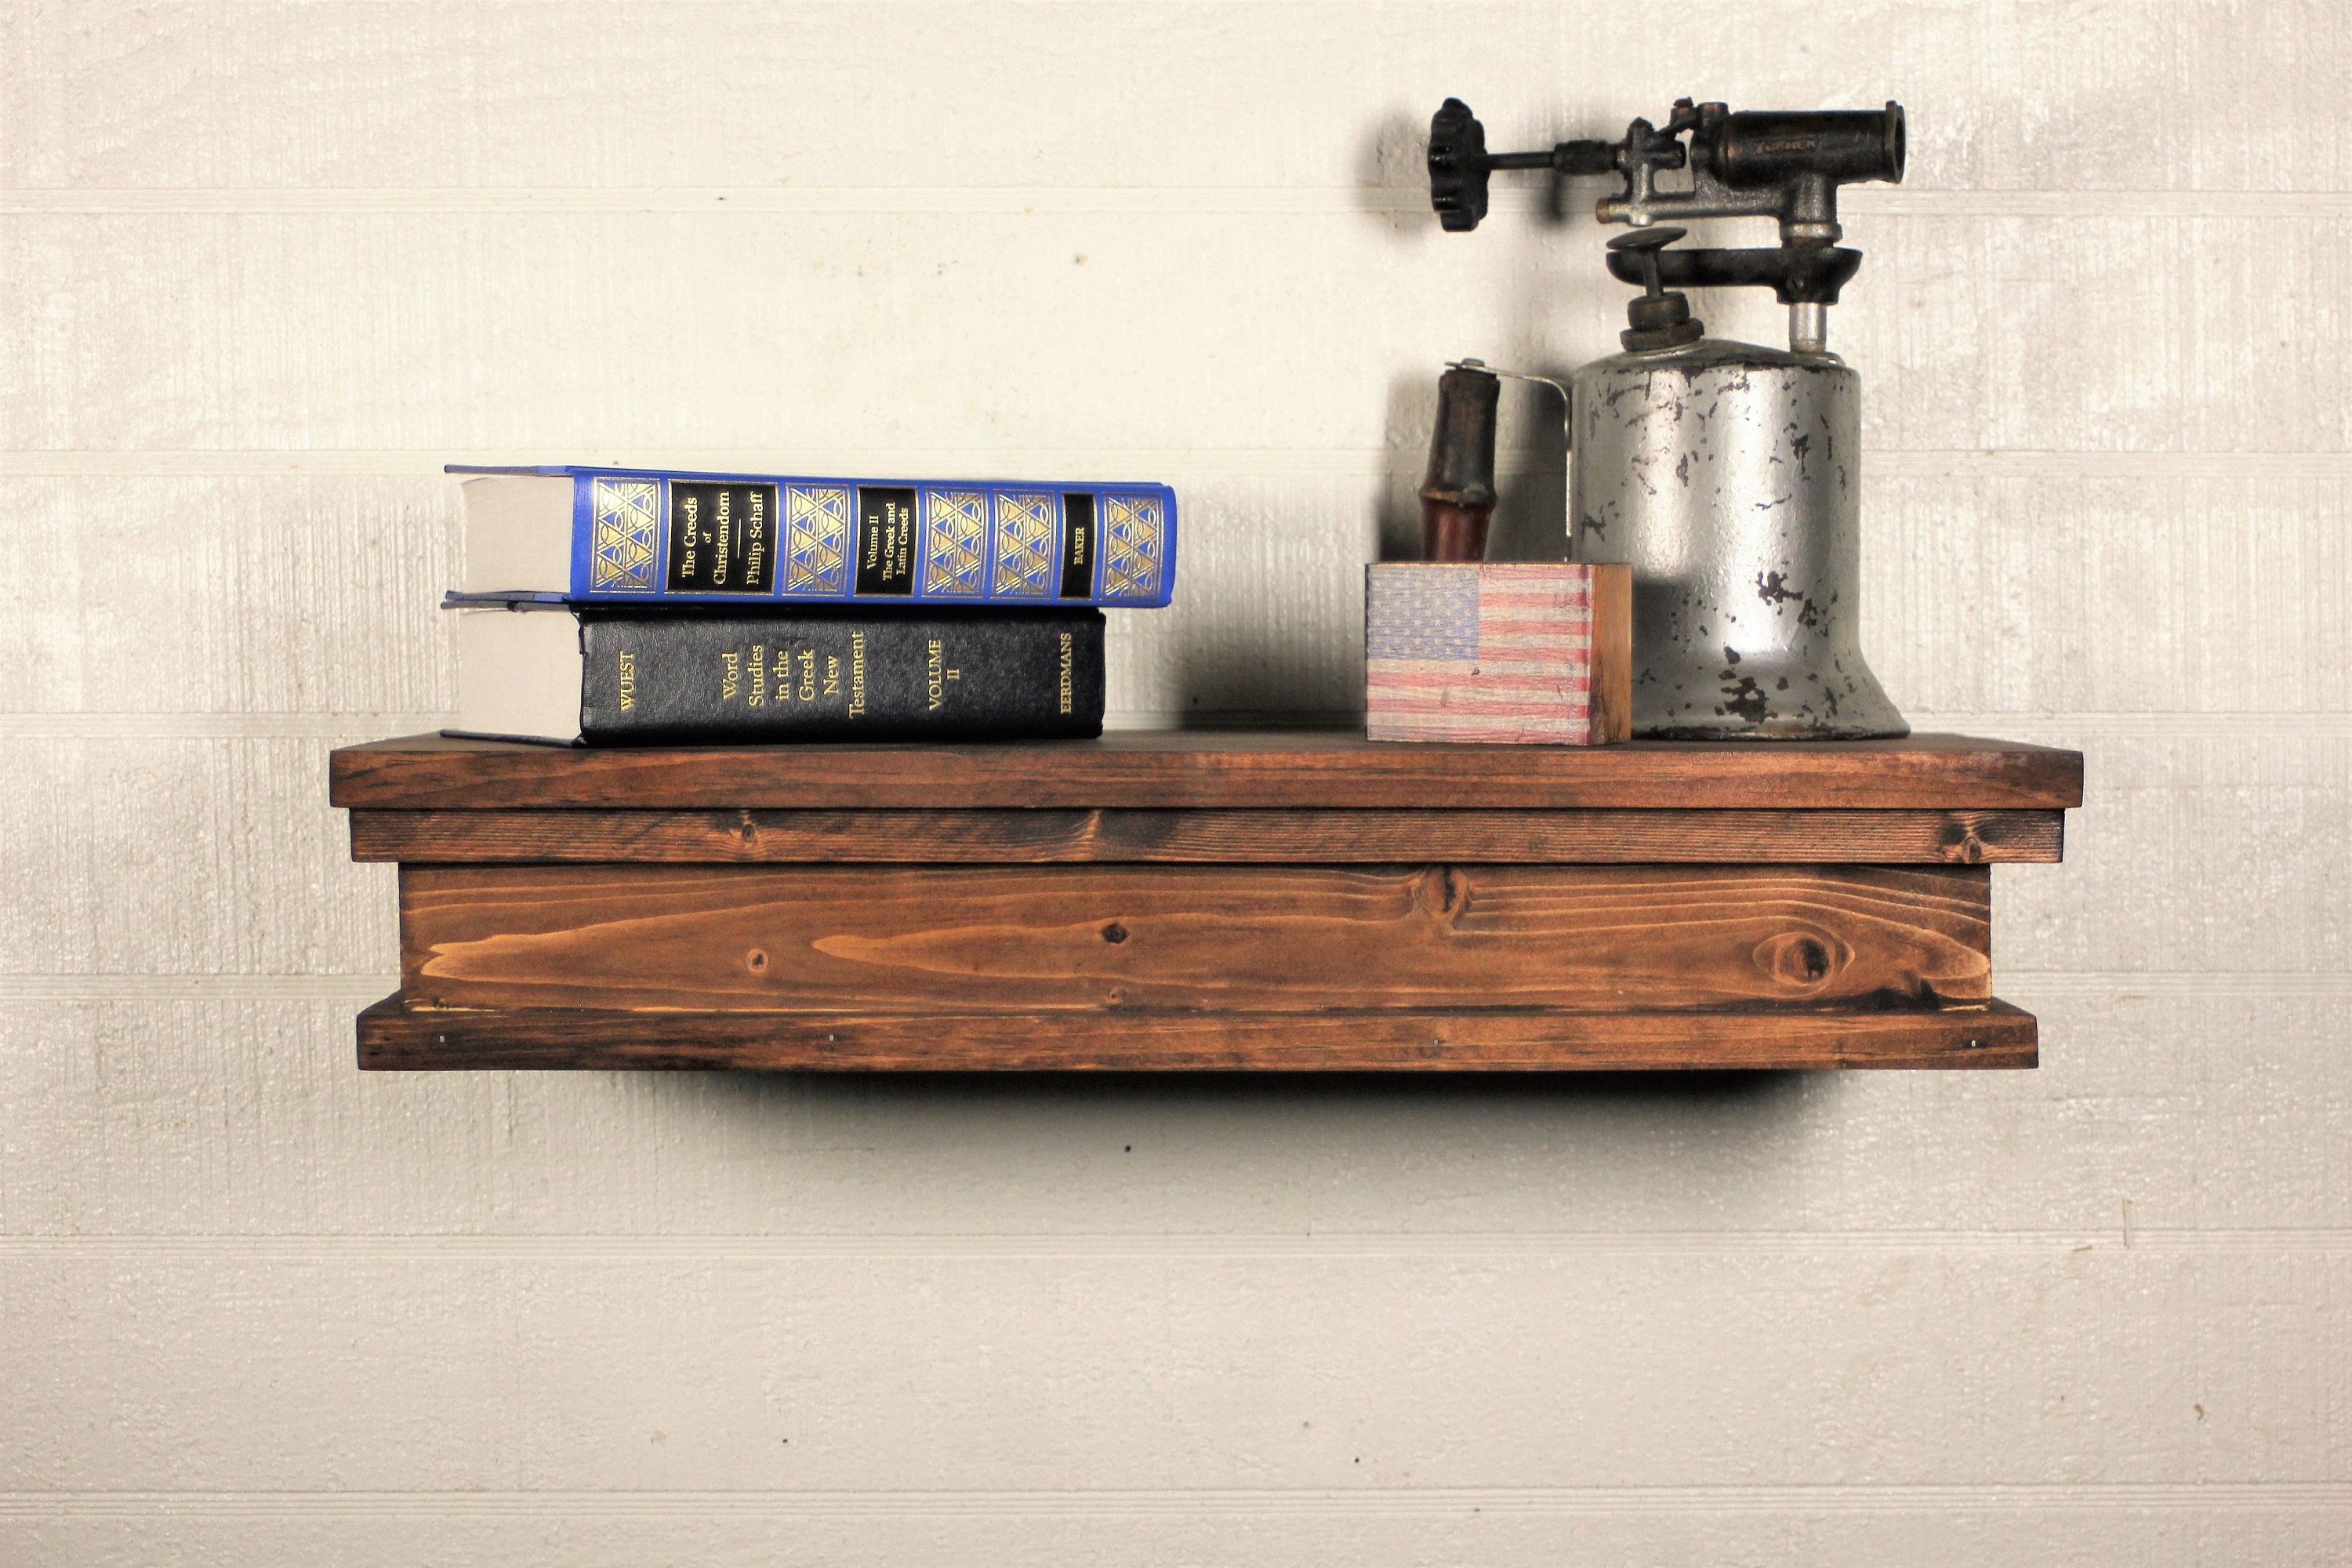 Floating Shelf With Hidden Gun Storage and Personalized Key, 23